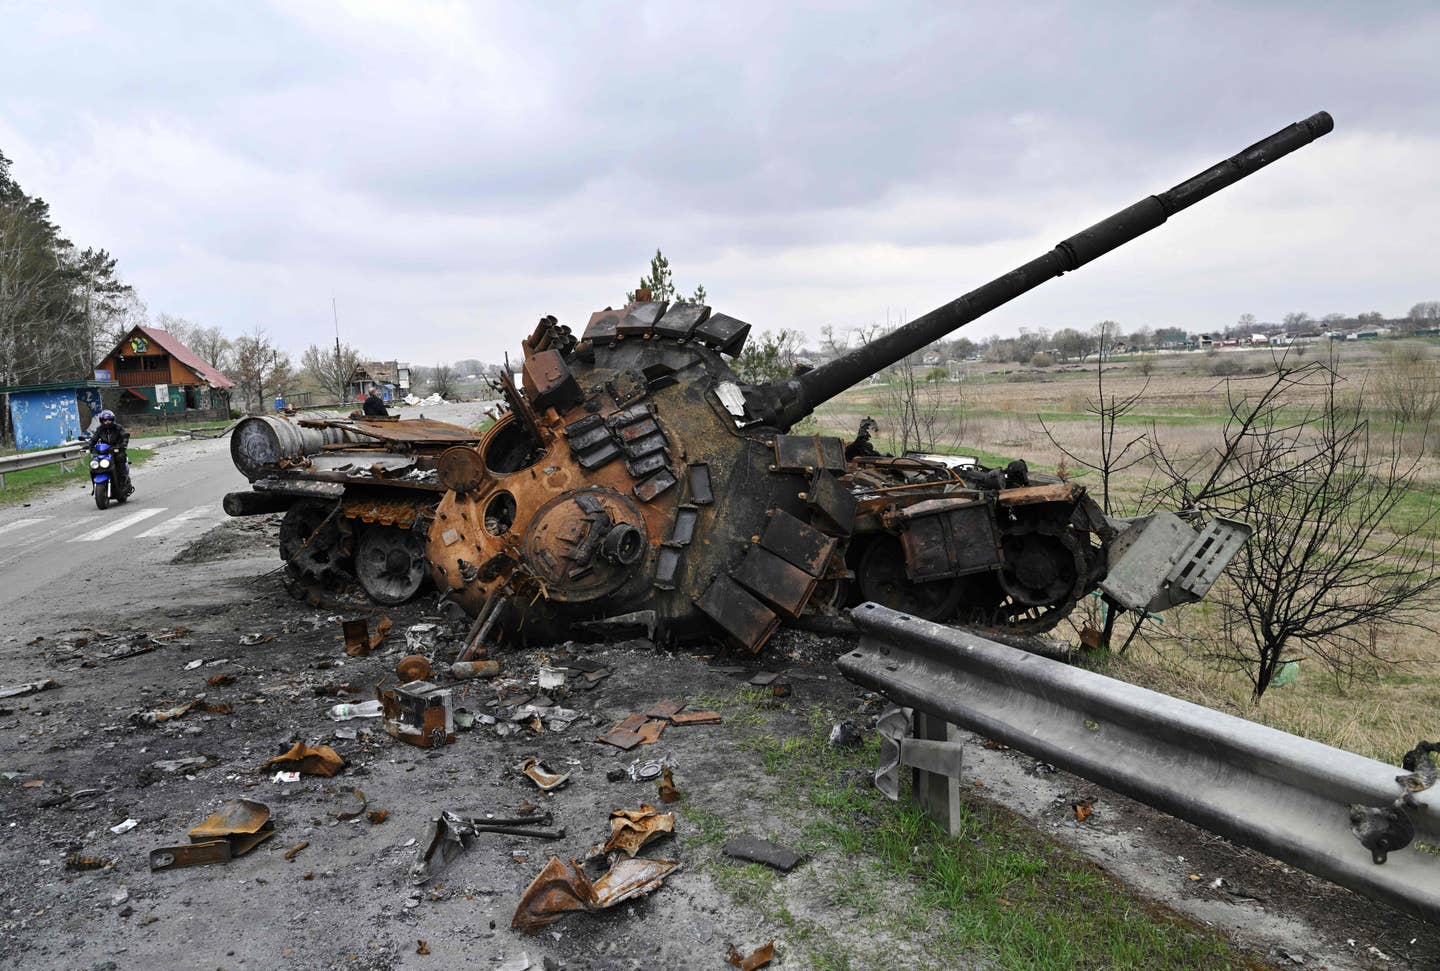 Small teams of Ukraine forces making quick hits have taken a toll on Russian armor. (Photo by Genya SAVILOV / AFP) (Photo by GENYA SAVILOV/AFP via Getty Images)